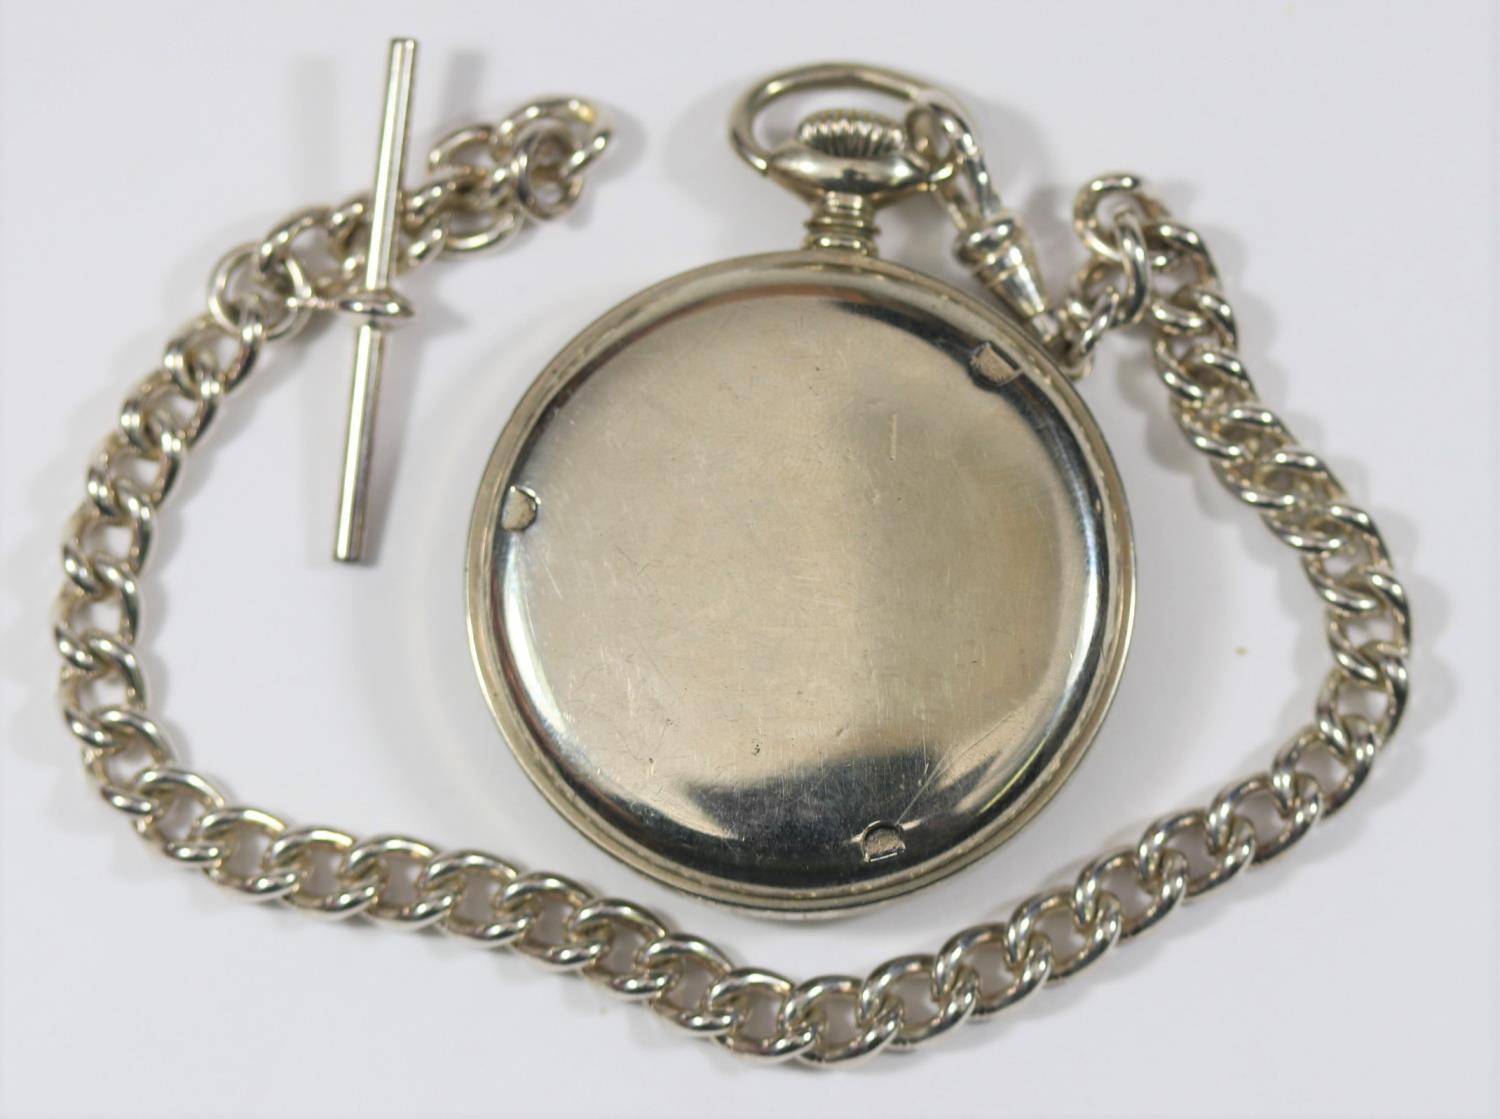 Doxa pocketwatch of type issued to Wehrmacht. Steel case with screw back, three tool indents on - Image 2 of 2